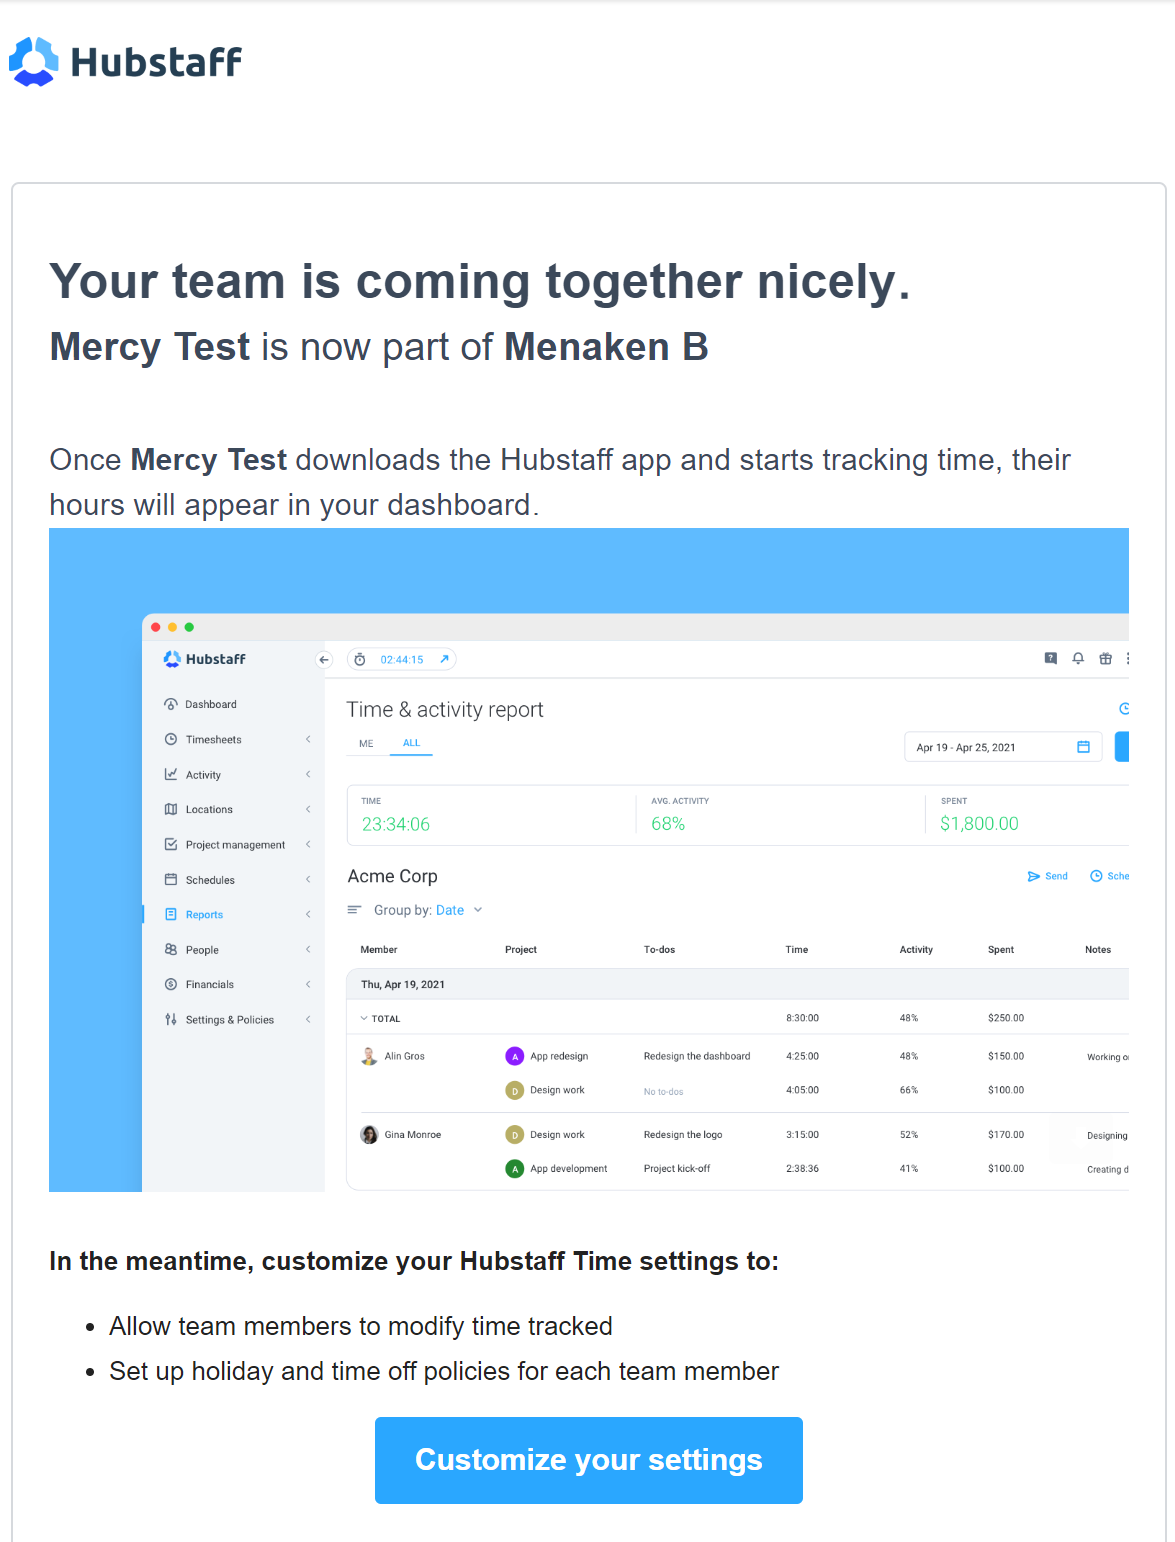 email invite-has joined your team